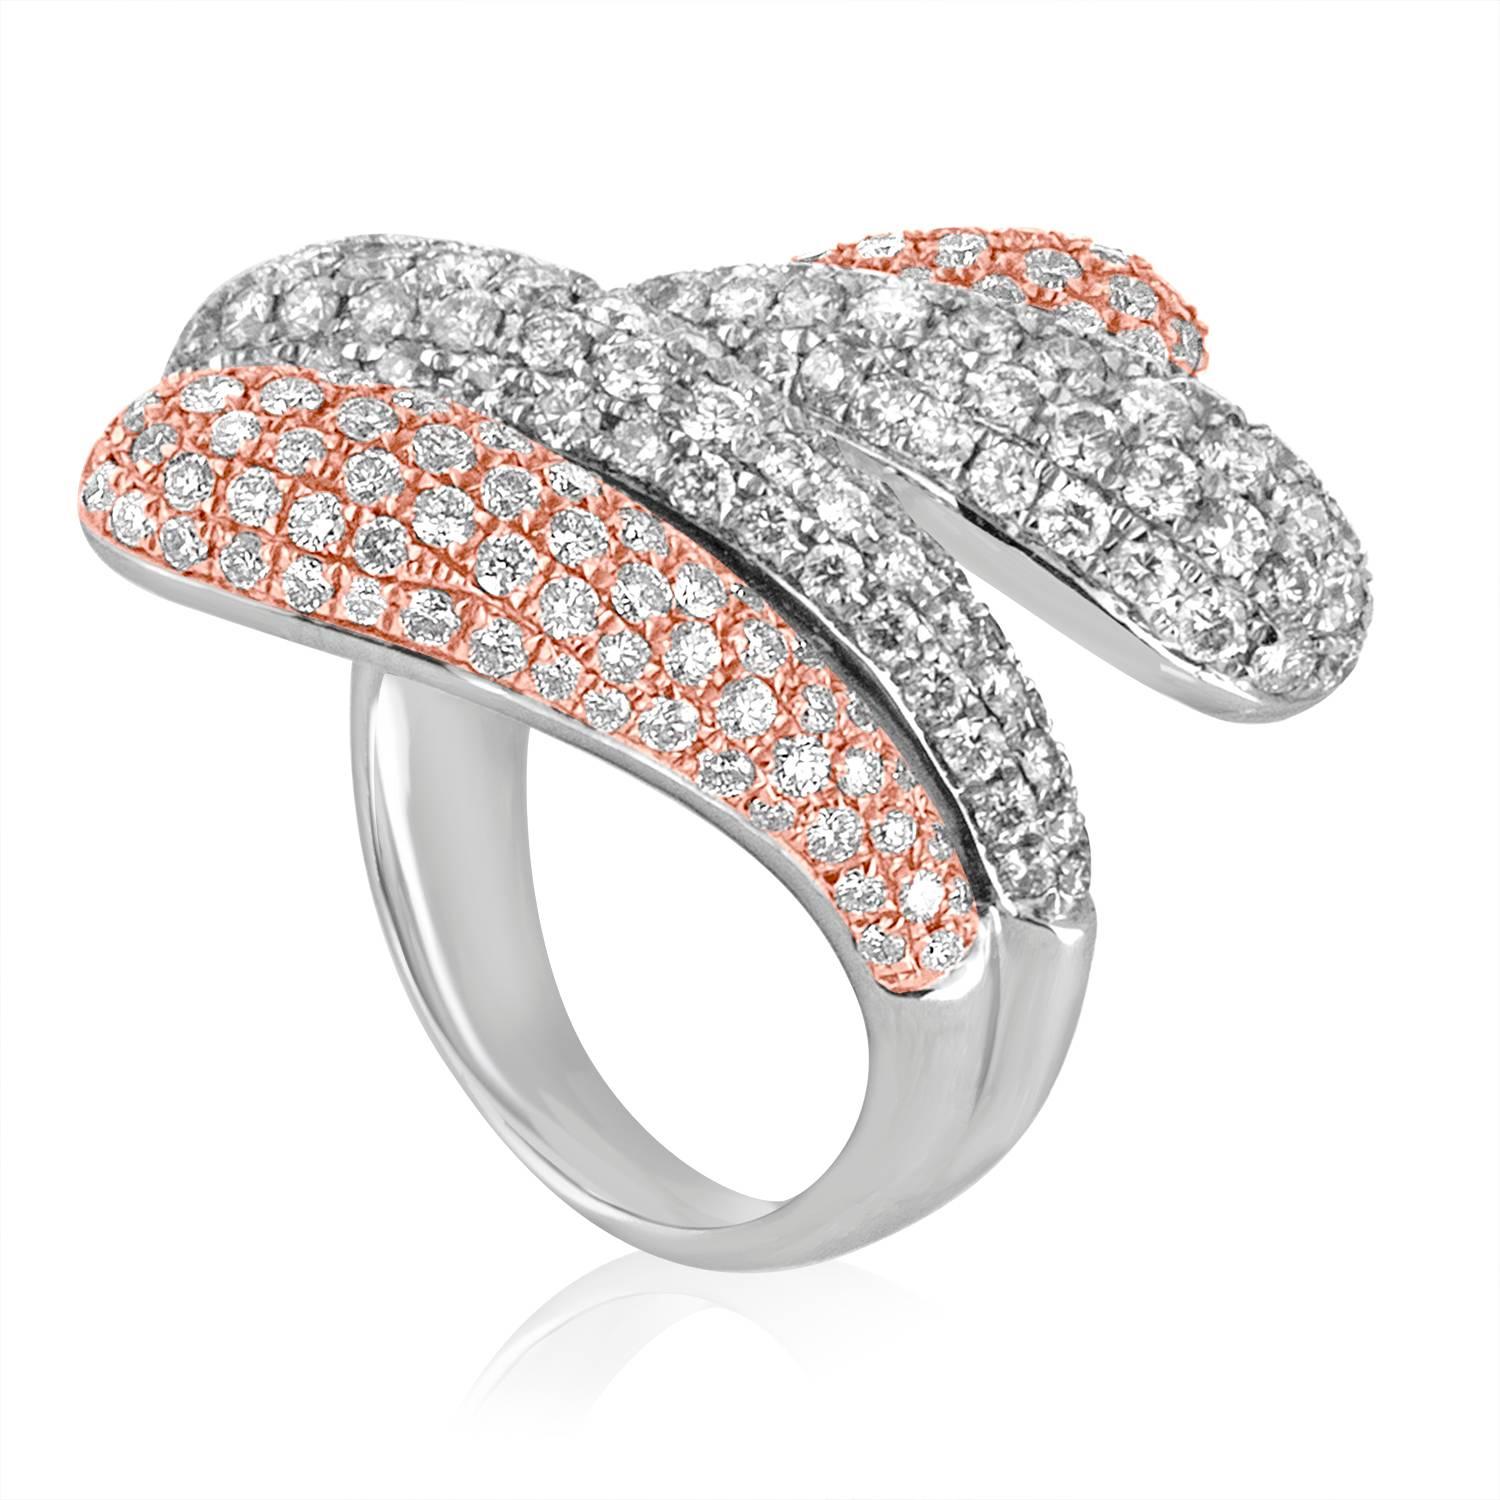 Beautiful Bypass Ring
The ring is 18K White & Rose Gold
There are 3.28 Carats in Diamonds F/G VS/SI
The ring measures 1 2/16